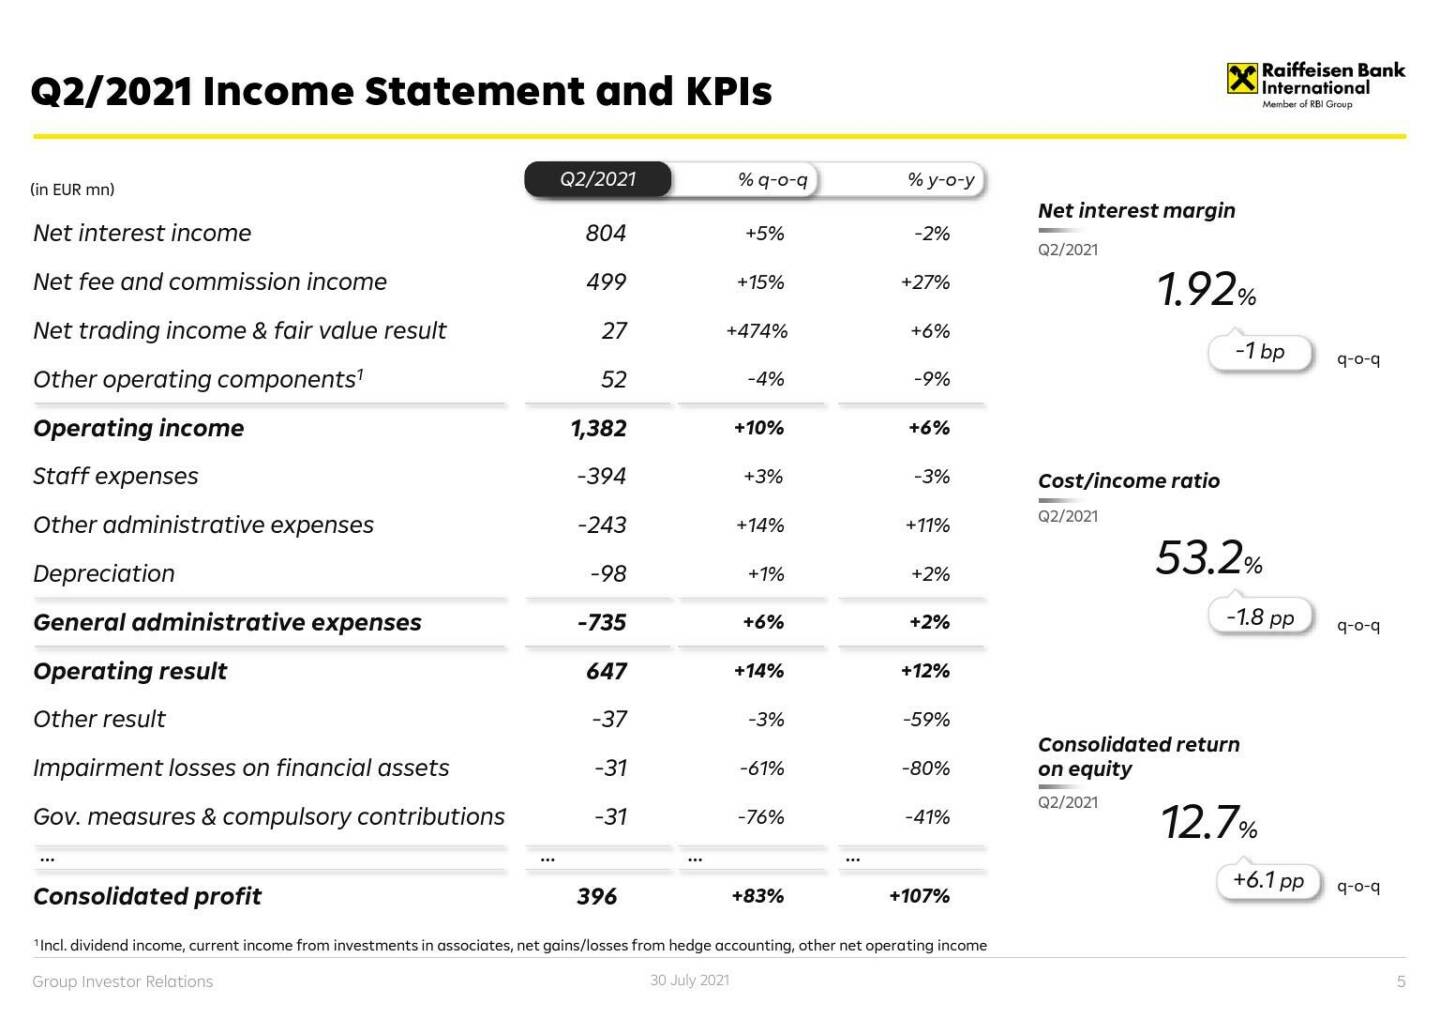 RBI - Q2/2021 Income statement and KPIs